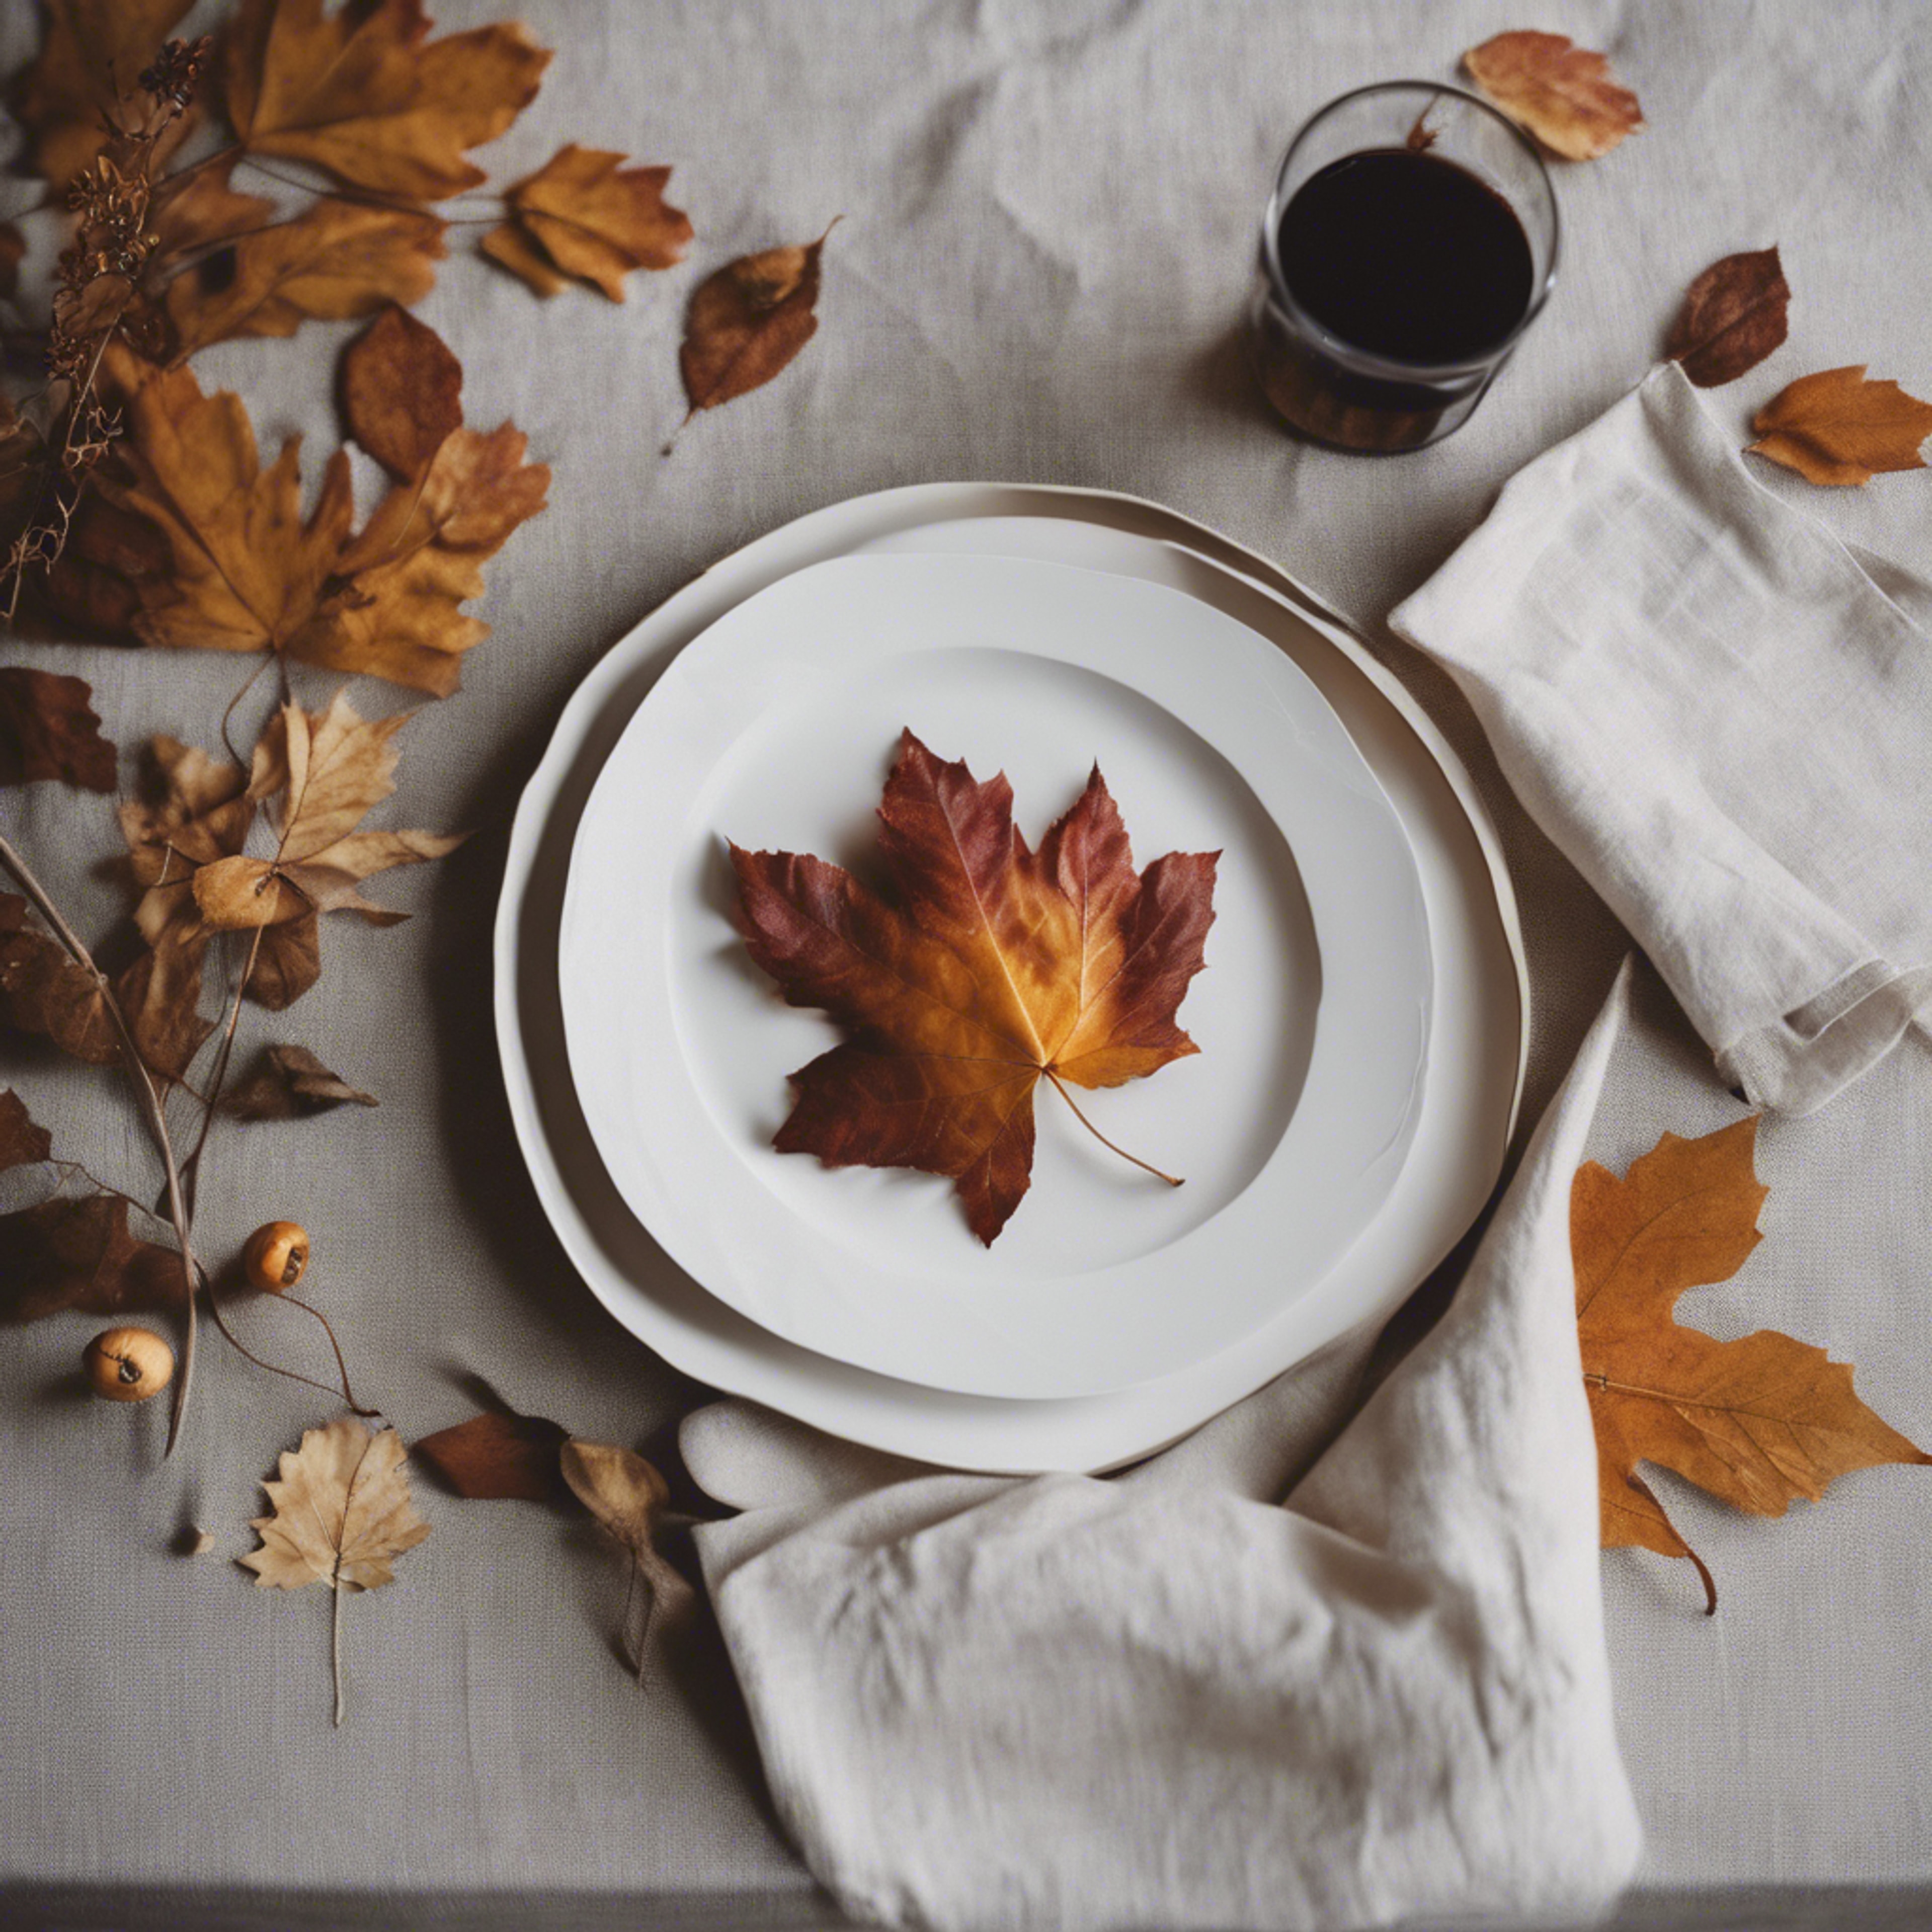 Simplicity-lover's Thanksgiving table decor with minimalistic white plates, natural linen napkins, and a few scattered autumn leaves.壁紙[4fdd30c95e164a8e8309]